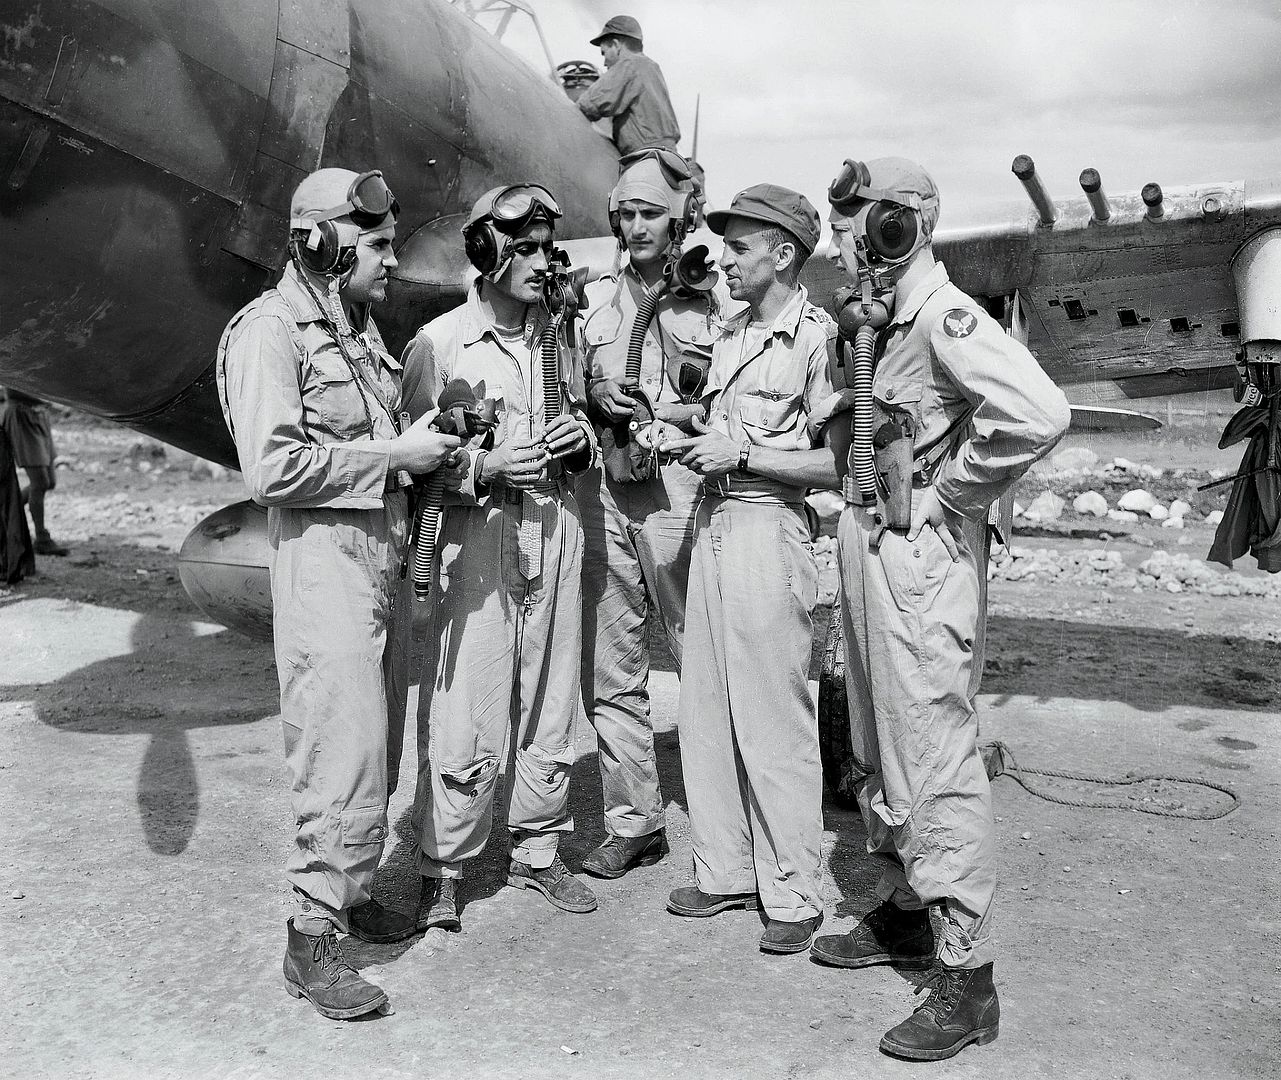 201st Fighter Squadron Of The Mexican Expeditionary Air Force Which Was Attached To The Fifth Air Force During World War II At Clark Field In The Philippines